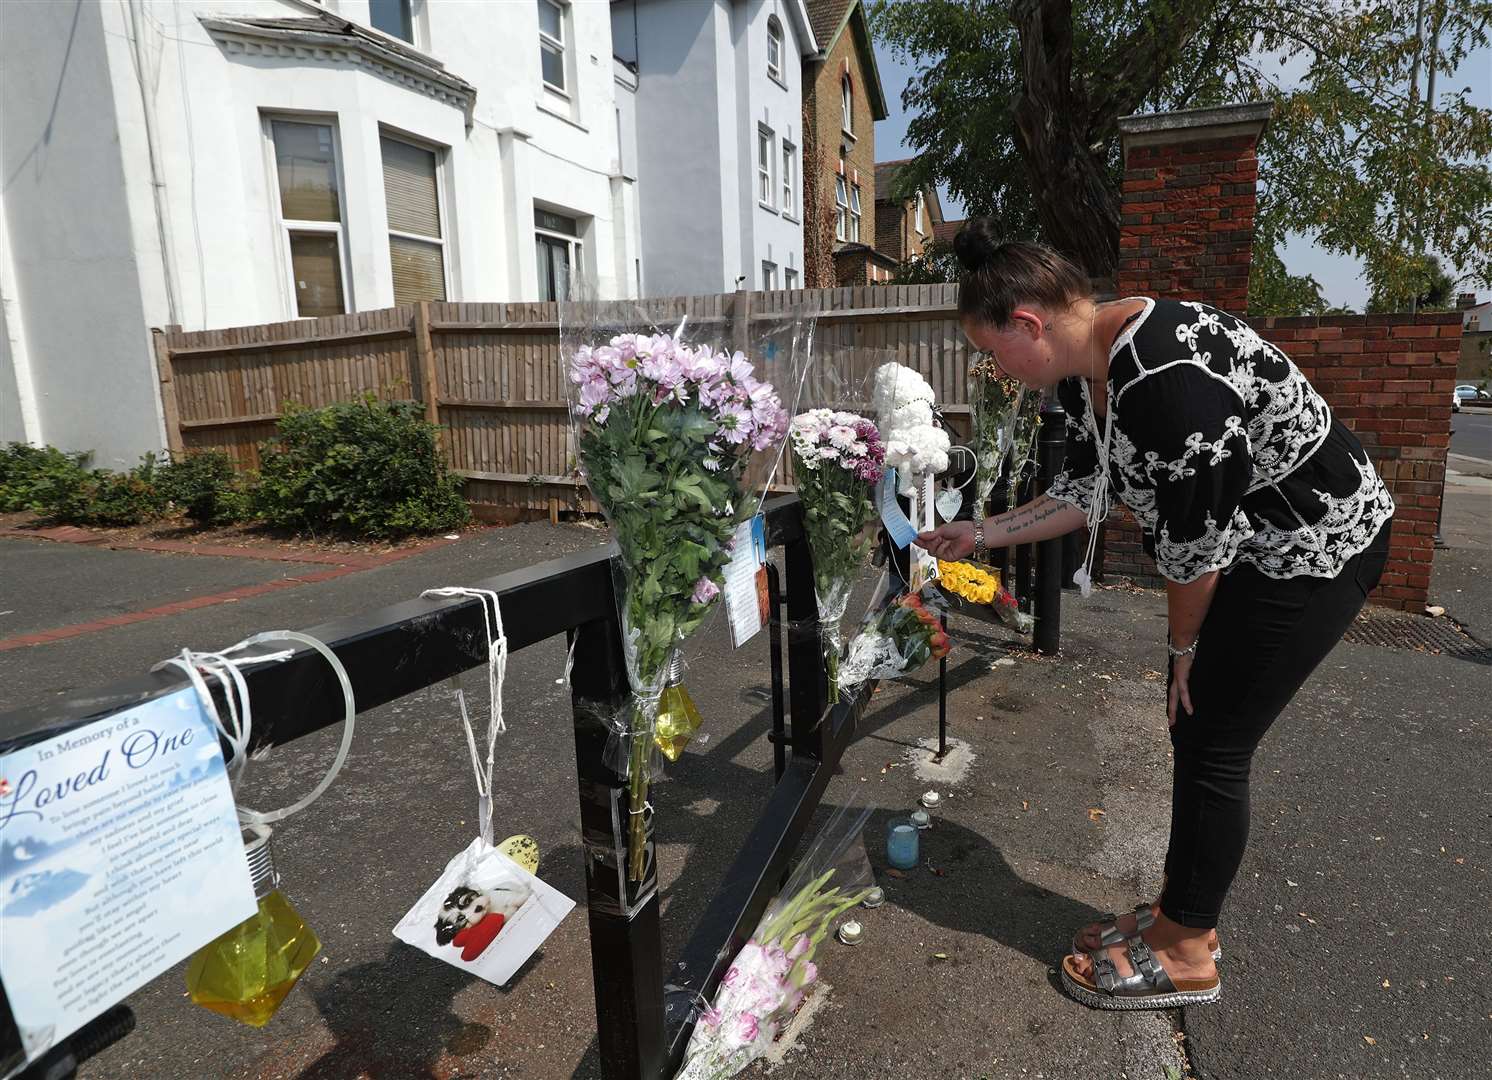 Hollie Edwards, the daughter of Dean Edwards, looks at tributes for her father at Betts Park in south London (Yui Mok/PA)